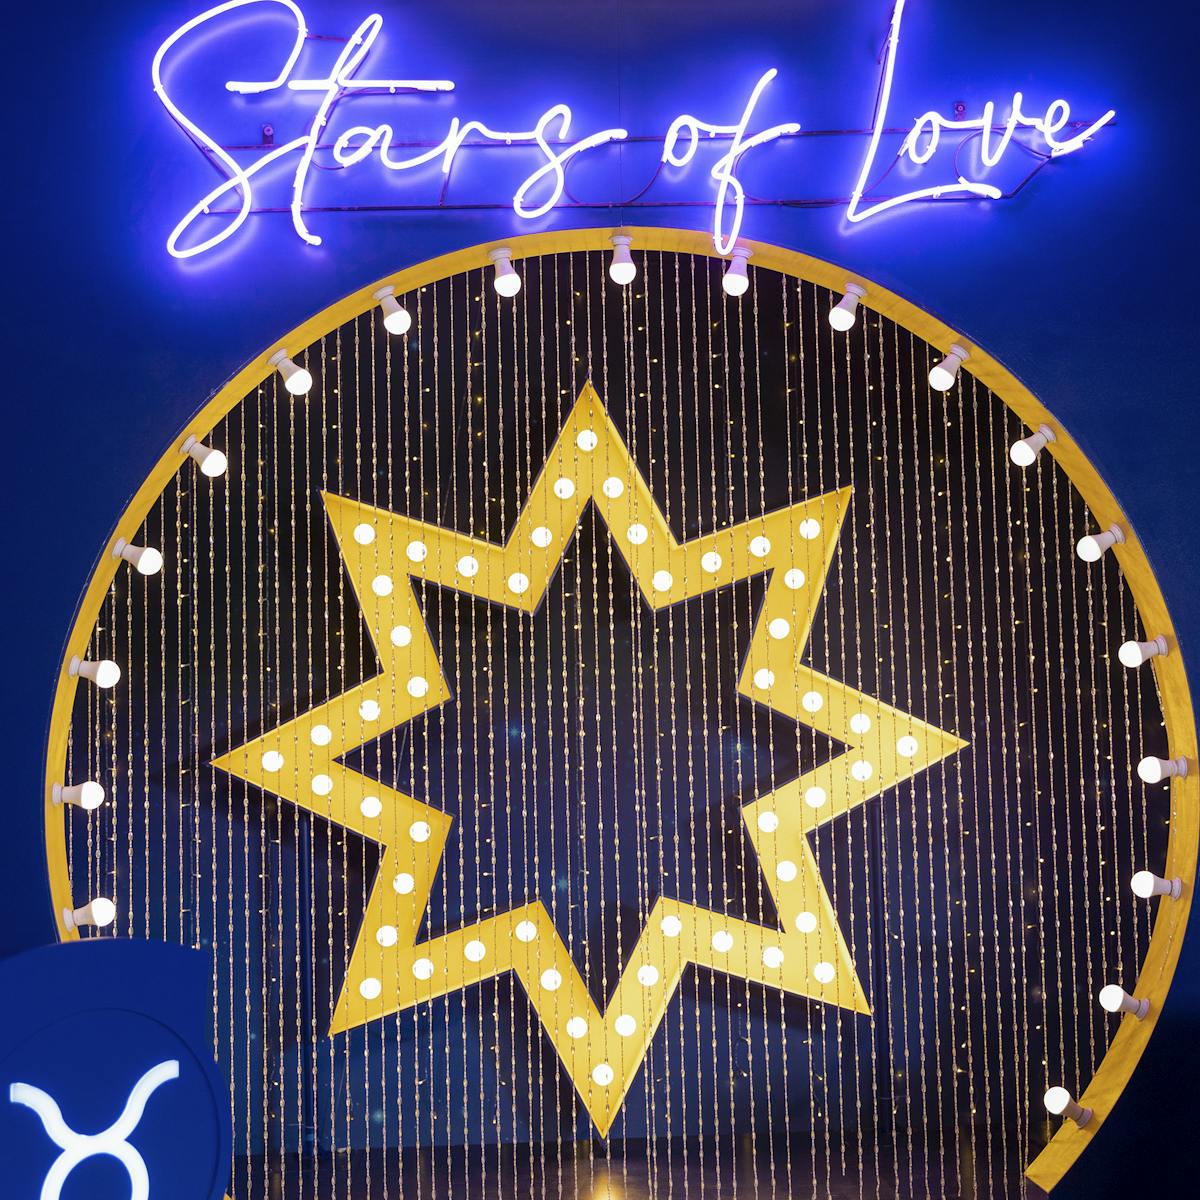 A yellow star flanked by horoscope signs. Atop the wheel says "Stars of Love."